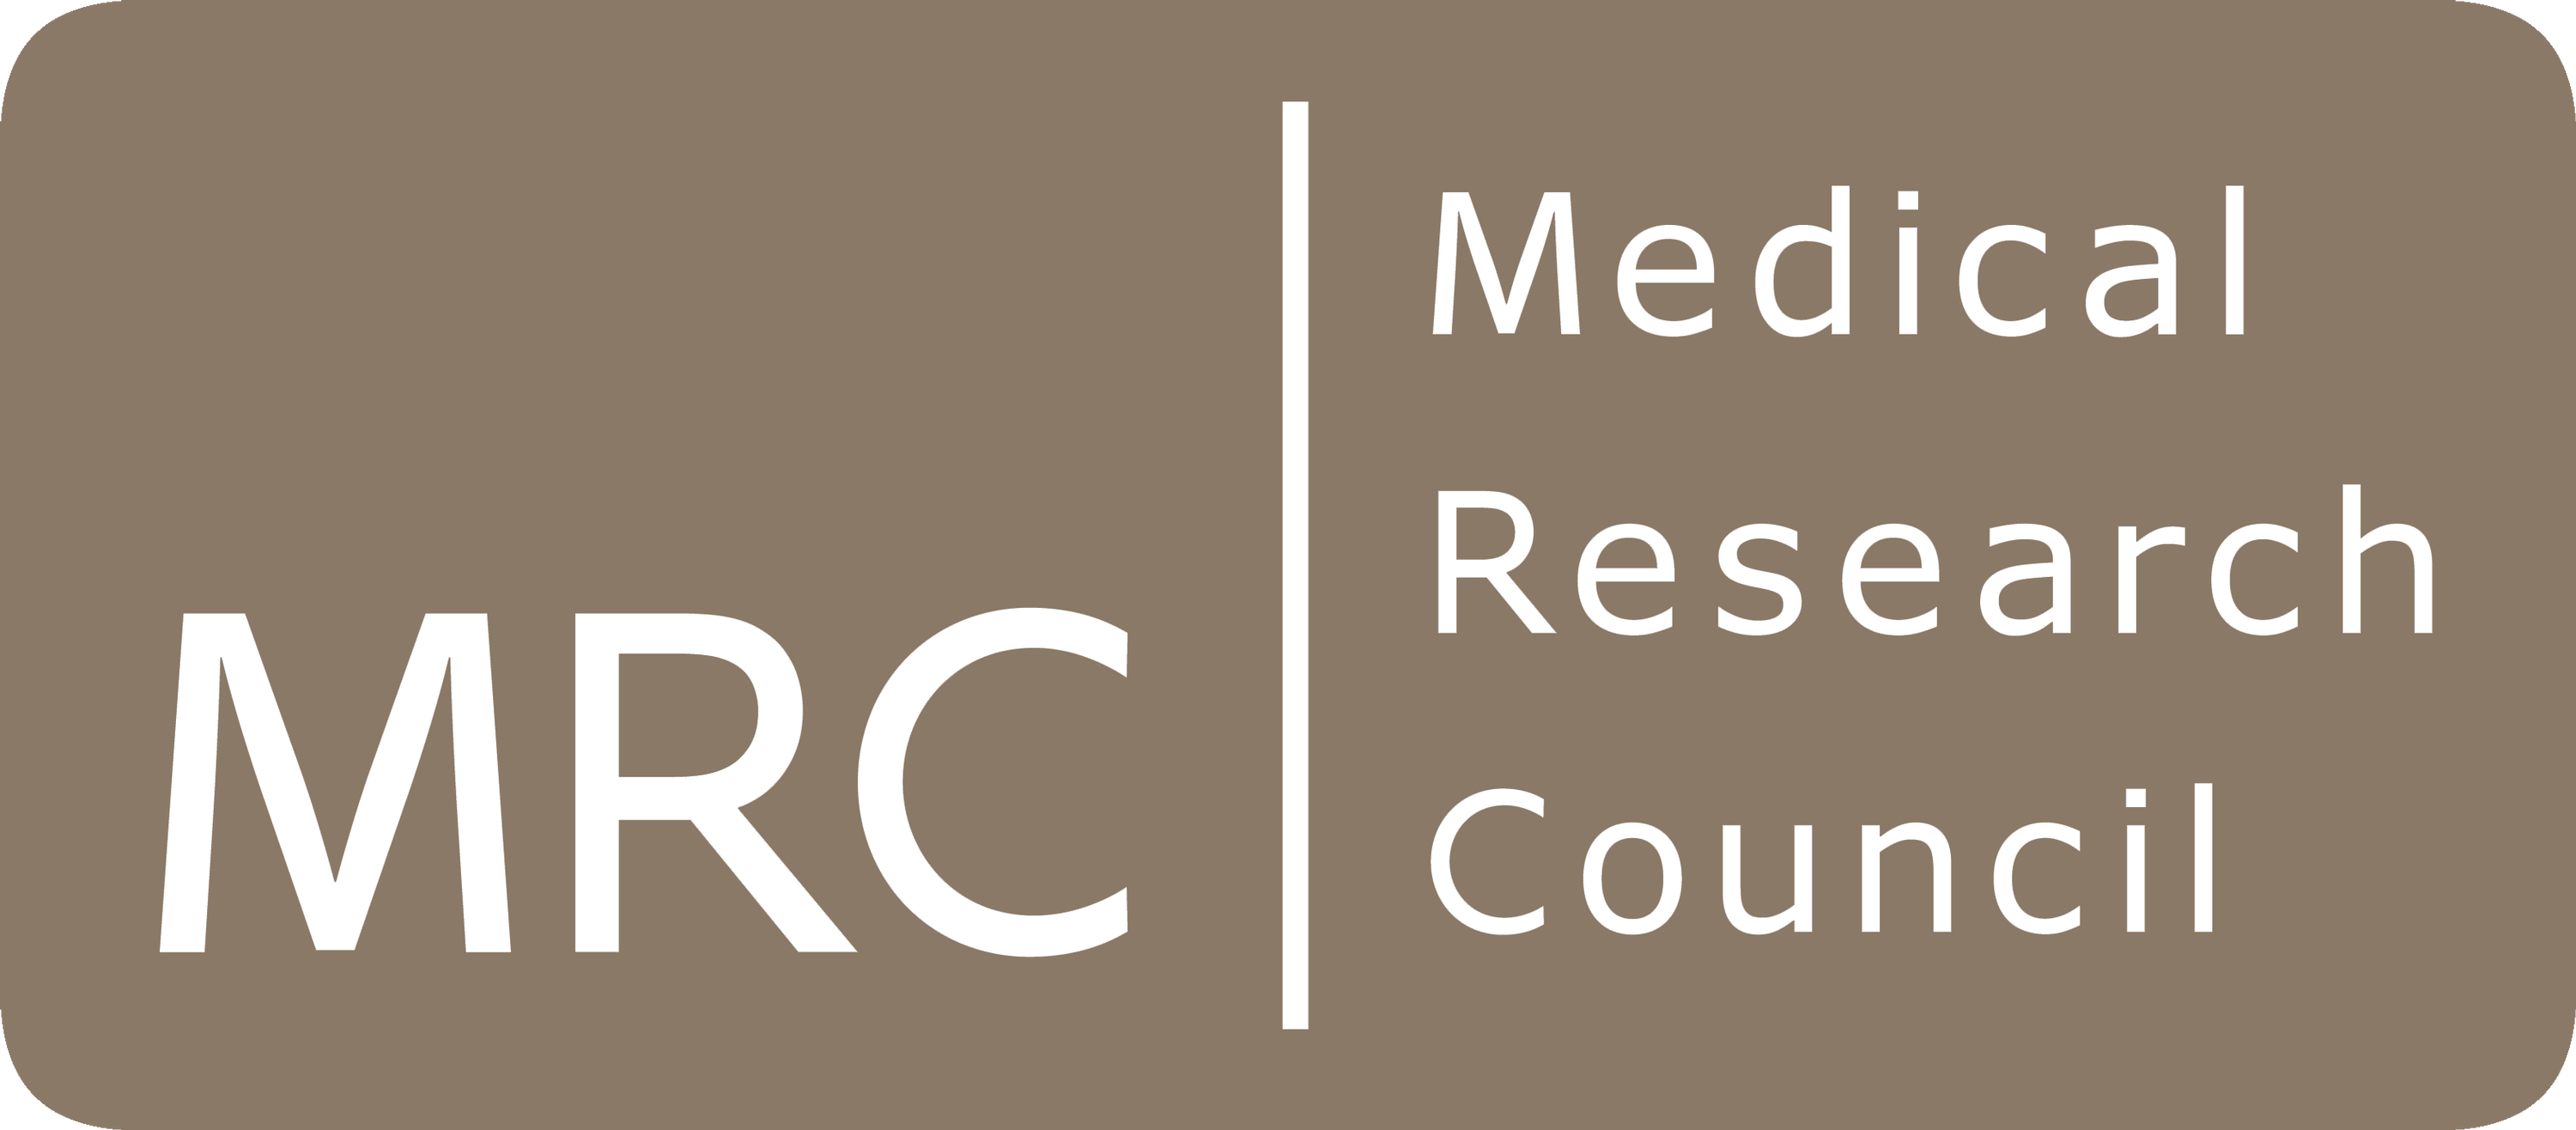 MRC Logo - Logos and strapline - About us - Medical Research Council